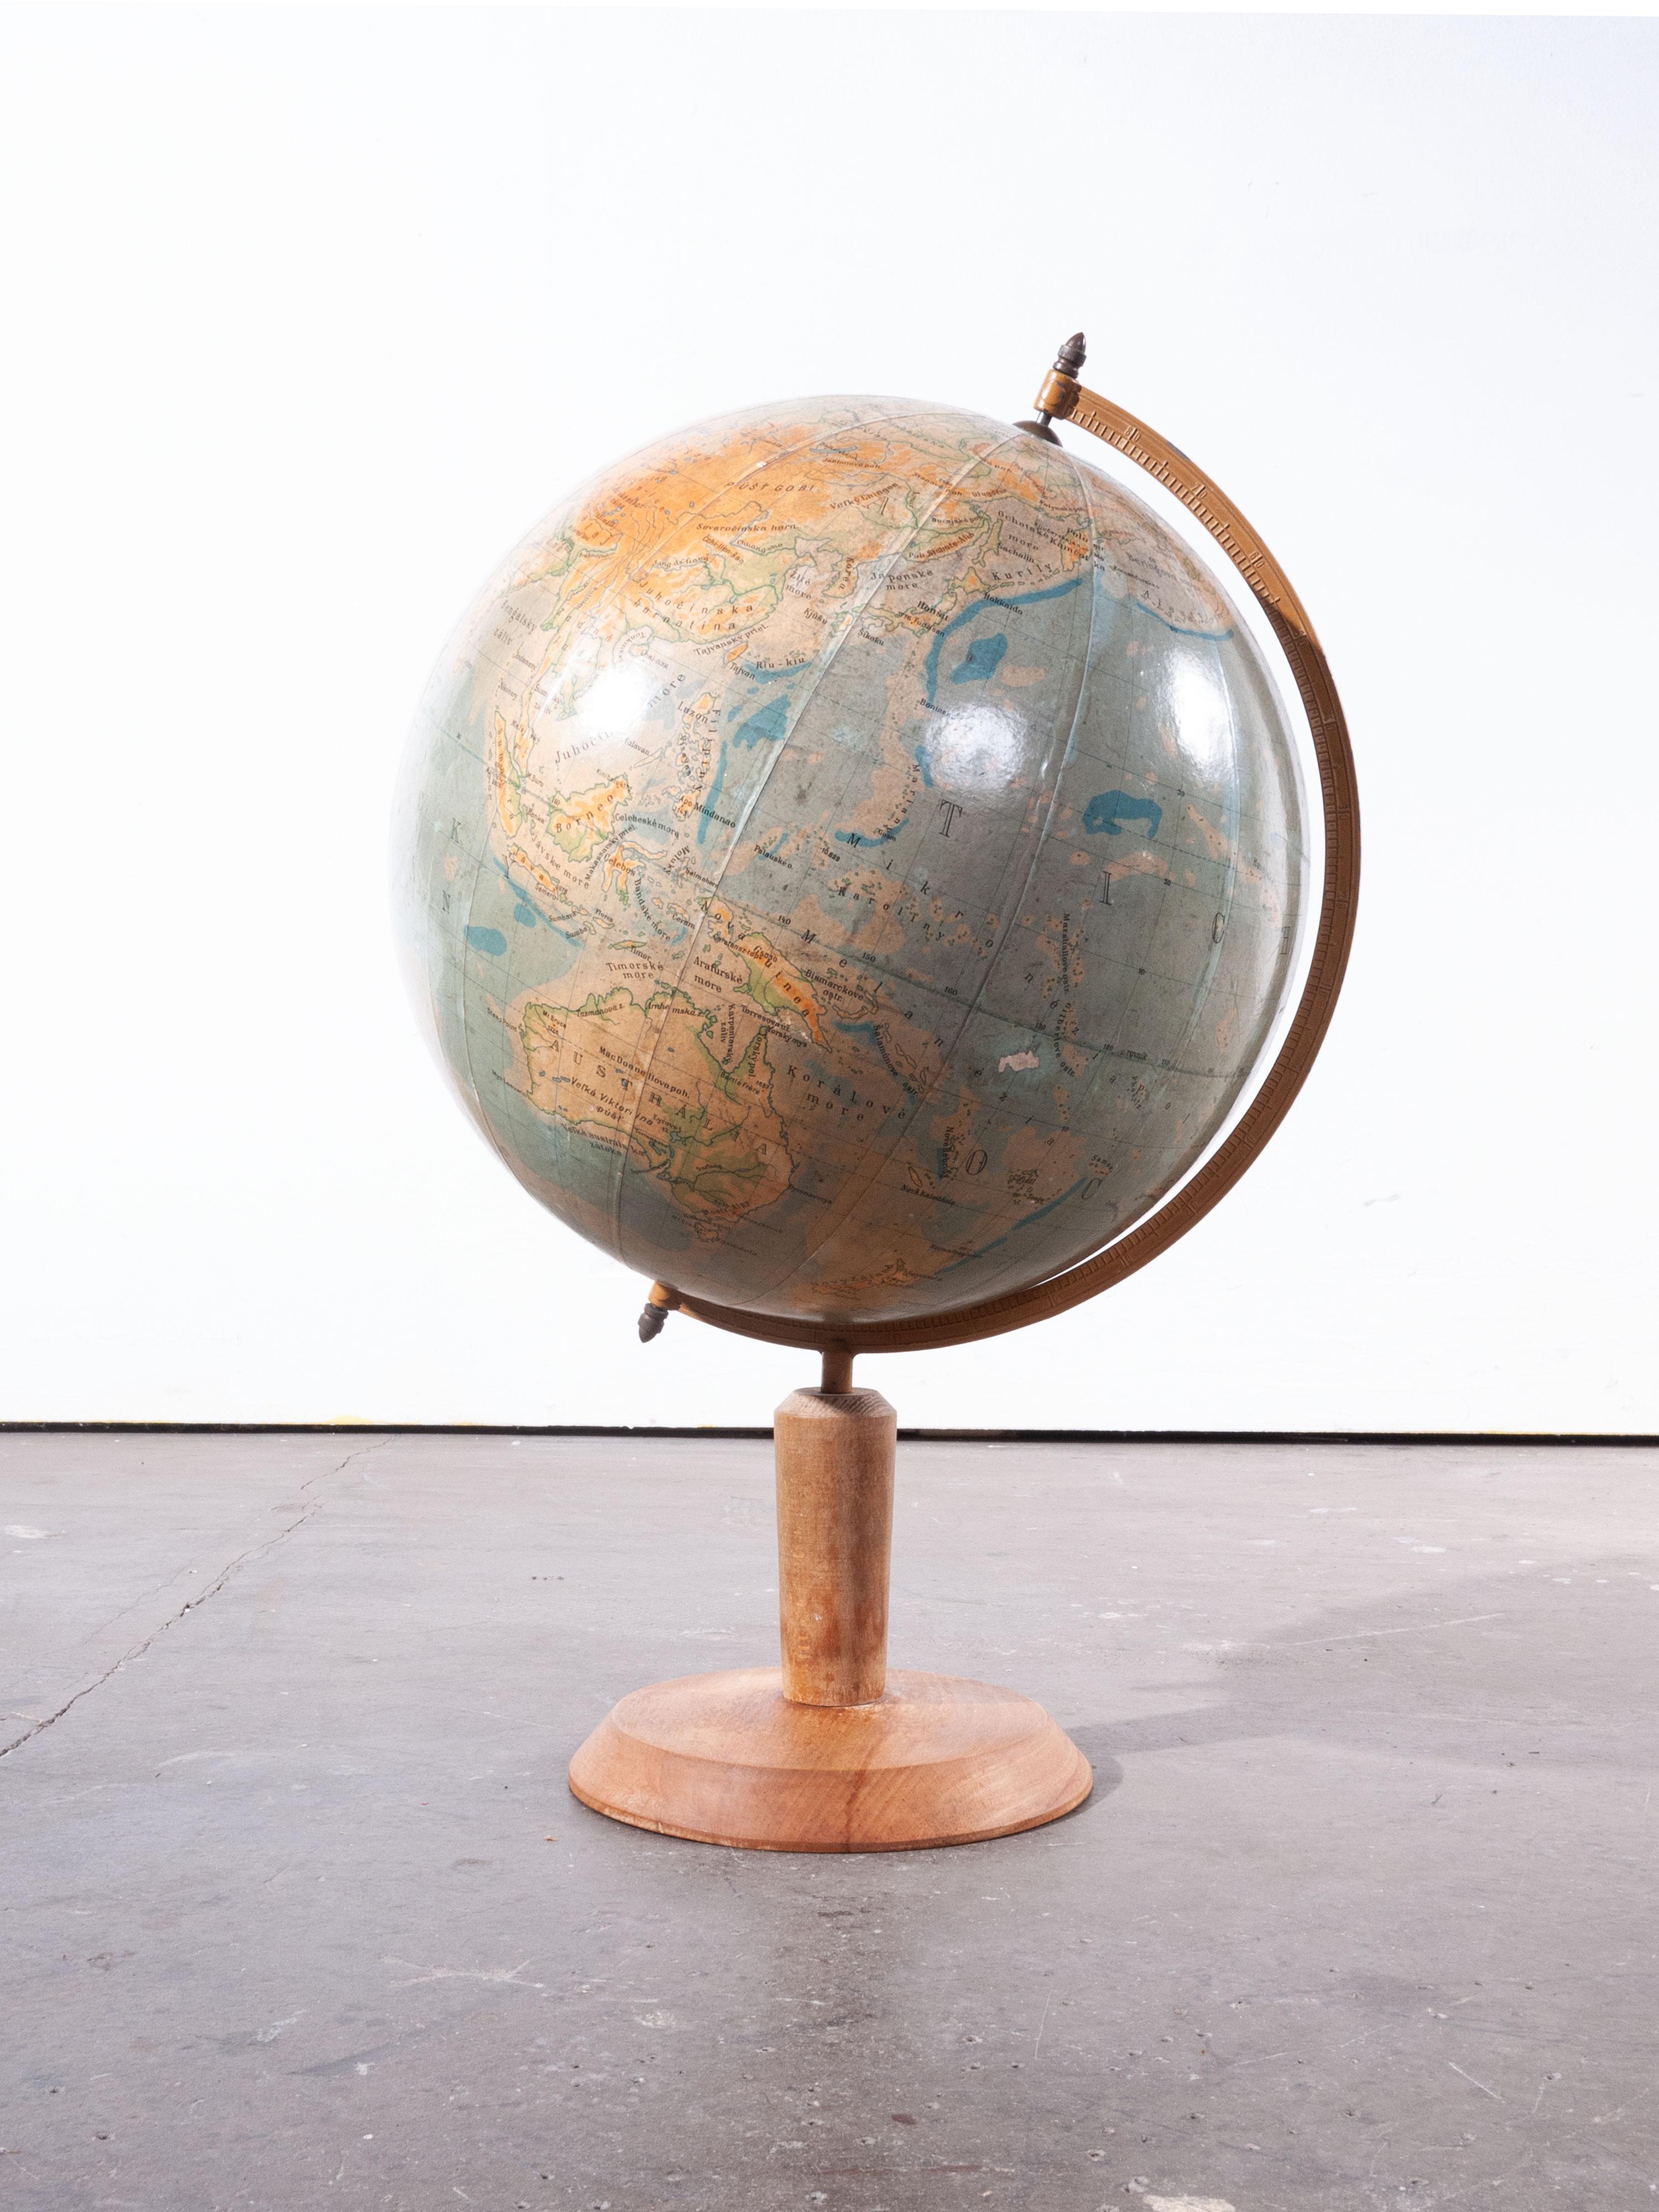 1950s Earth rotating teaching globe

1950s earth rotating teaching globe. Sourced from a Czech collector, this geographic teaching globe is in exceptional condition. Contemporary 30cm striped ruler for scale reference only, not included in the